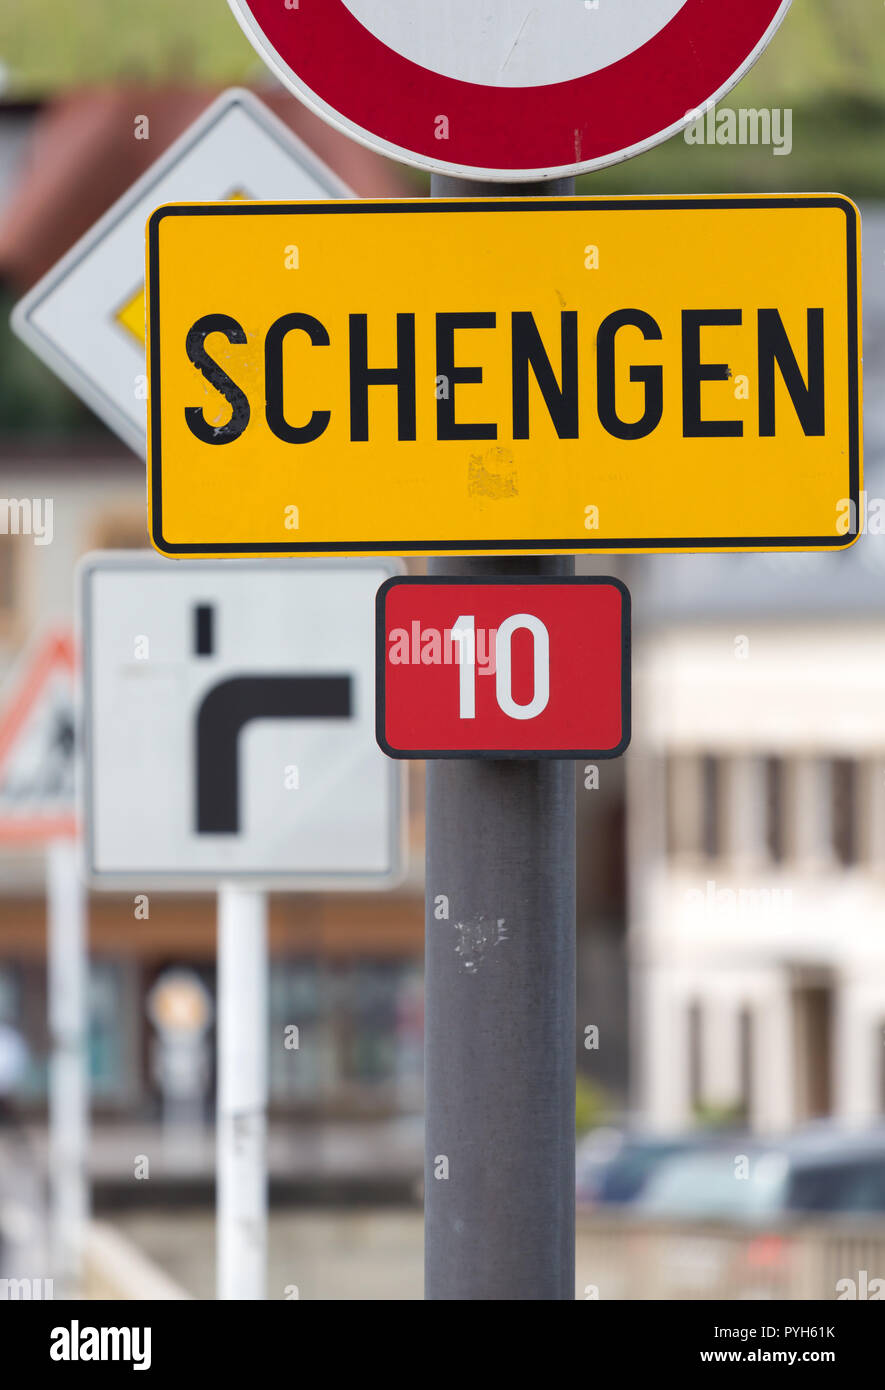 Schengen, Luxembourg - place-name sign Schengen on the bridge over the Mosel River, where the German-Luxembourg border runs Stock Photo